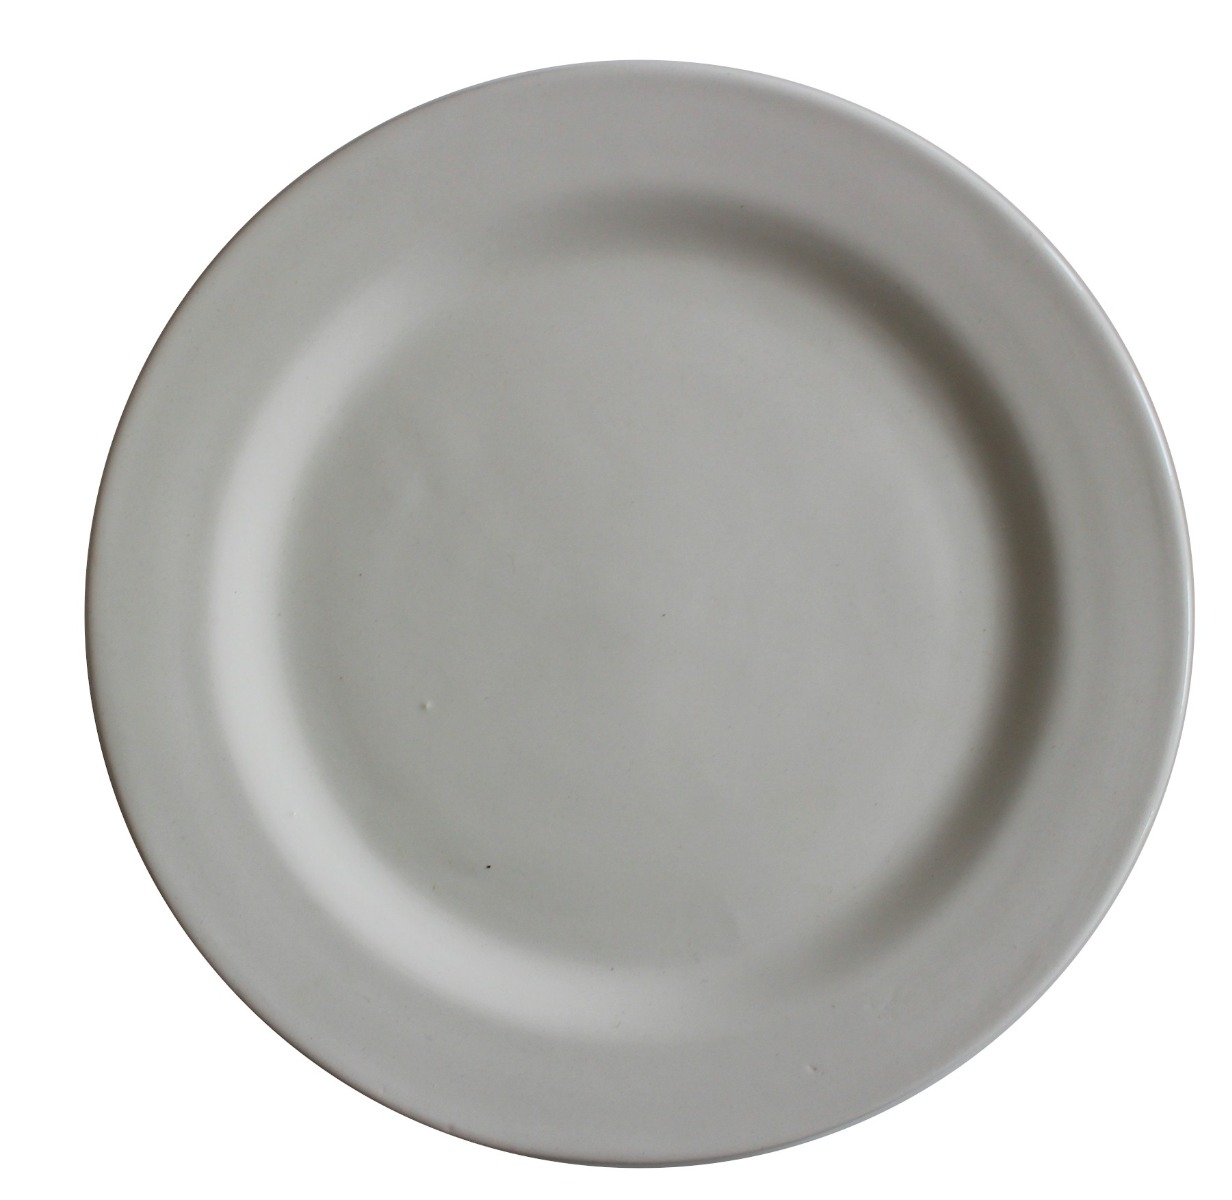 GERMAN SS REICH PORCELAIN DINNER PLATE  - STAGTIENGSTELD 1944